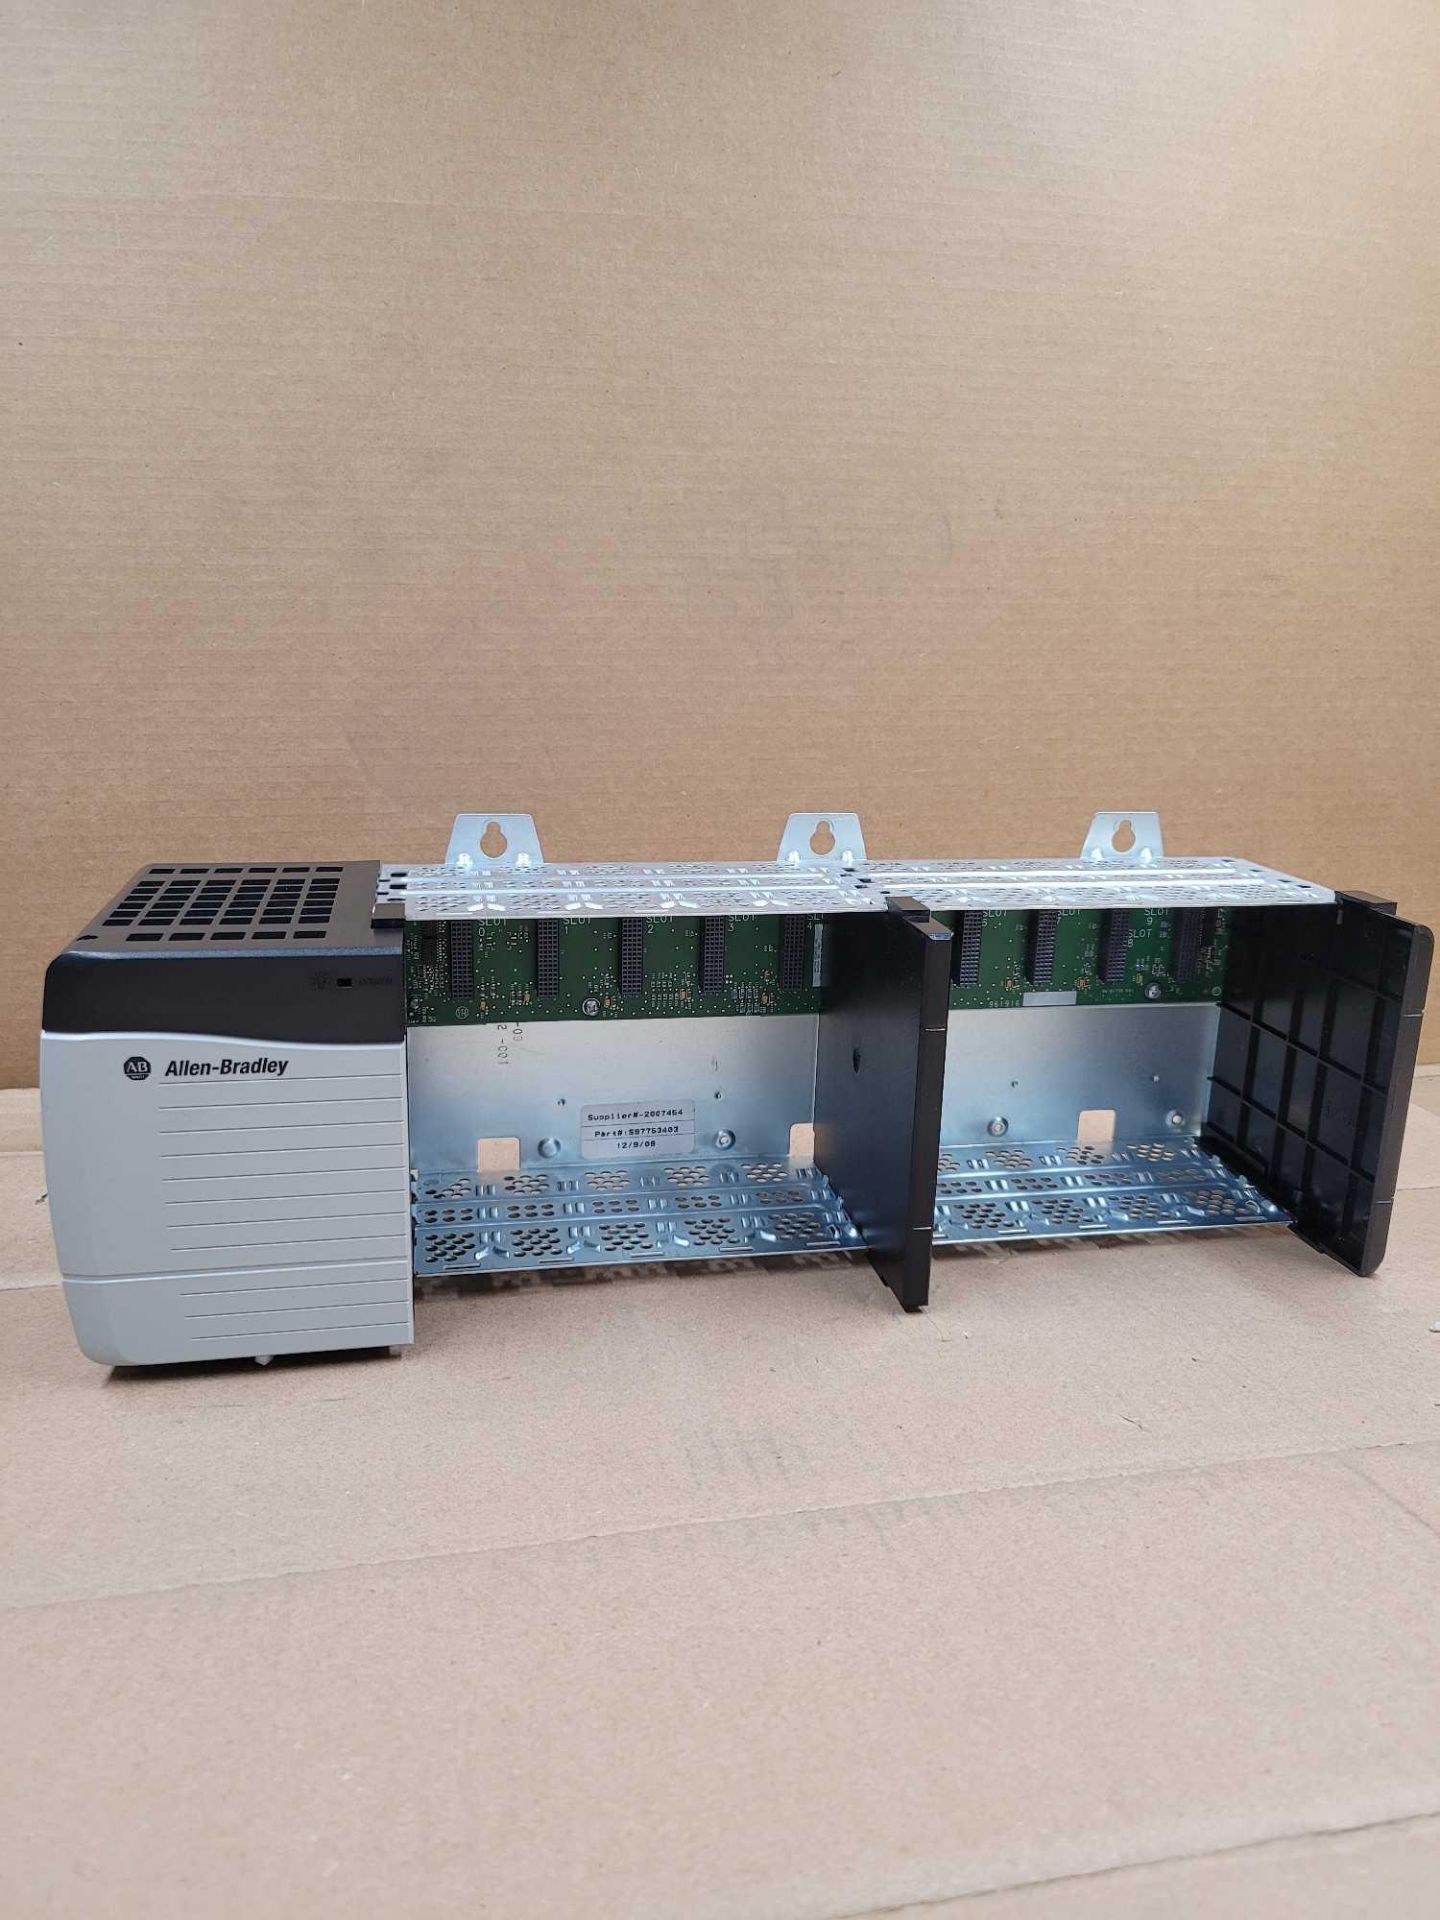 ALLEN BRADLEY 1756-PA75 with 1756-A10B   / Series A Power Supply with 10 Slot PLC Chassis  /  Lot We